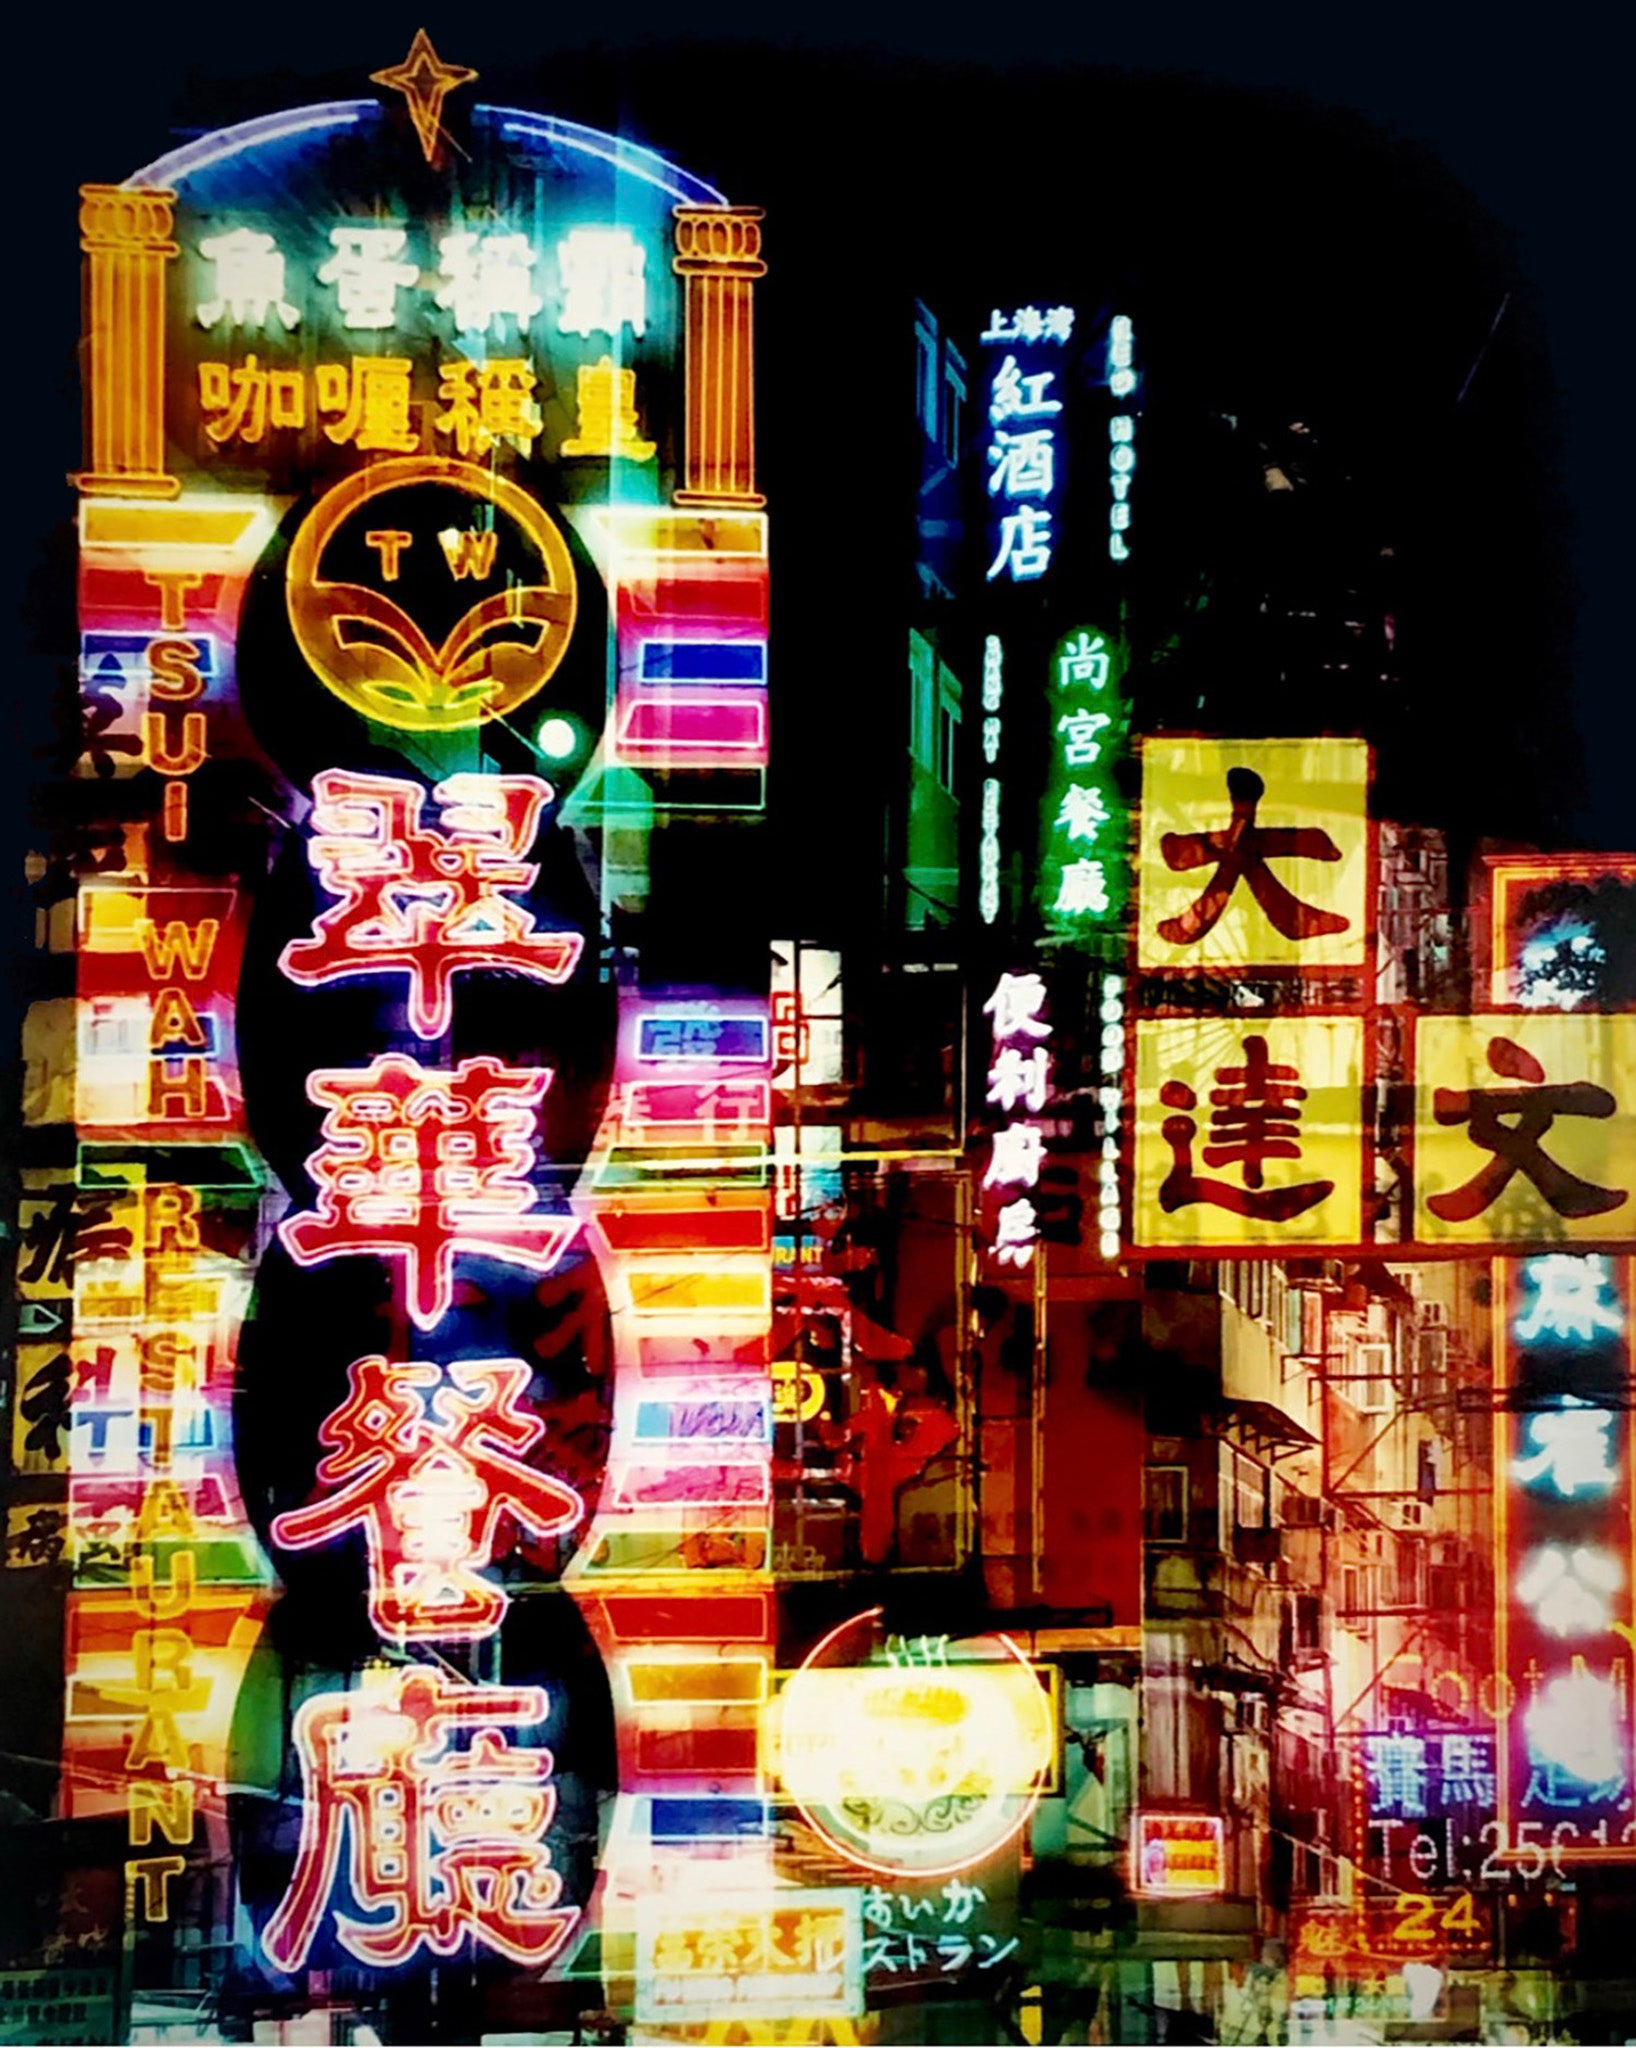 Buzzing neon lights fill the narrow streets of the Mong Kok area in Kowloon, Hong Kong